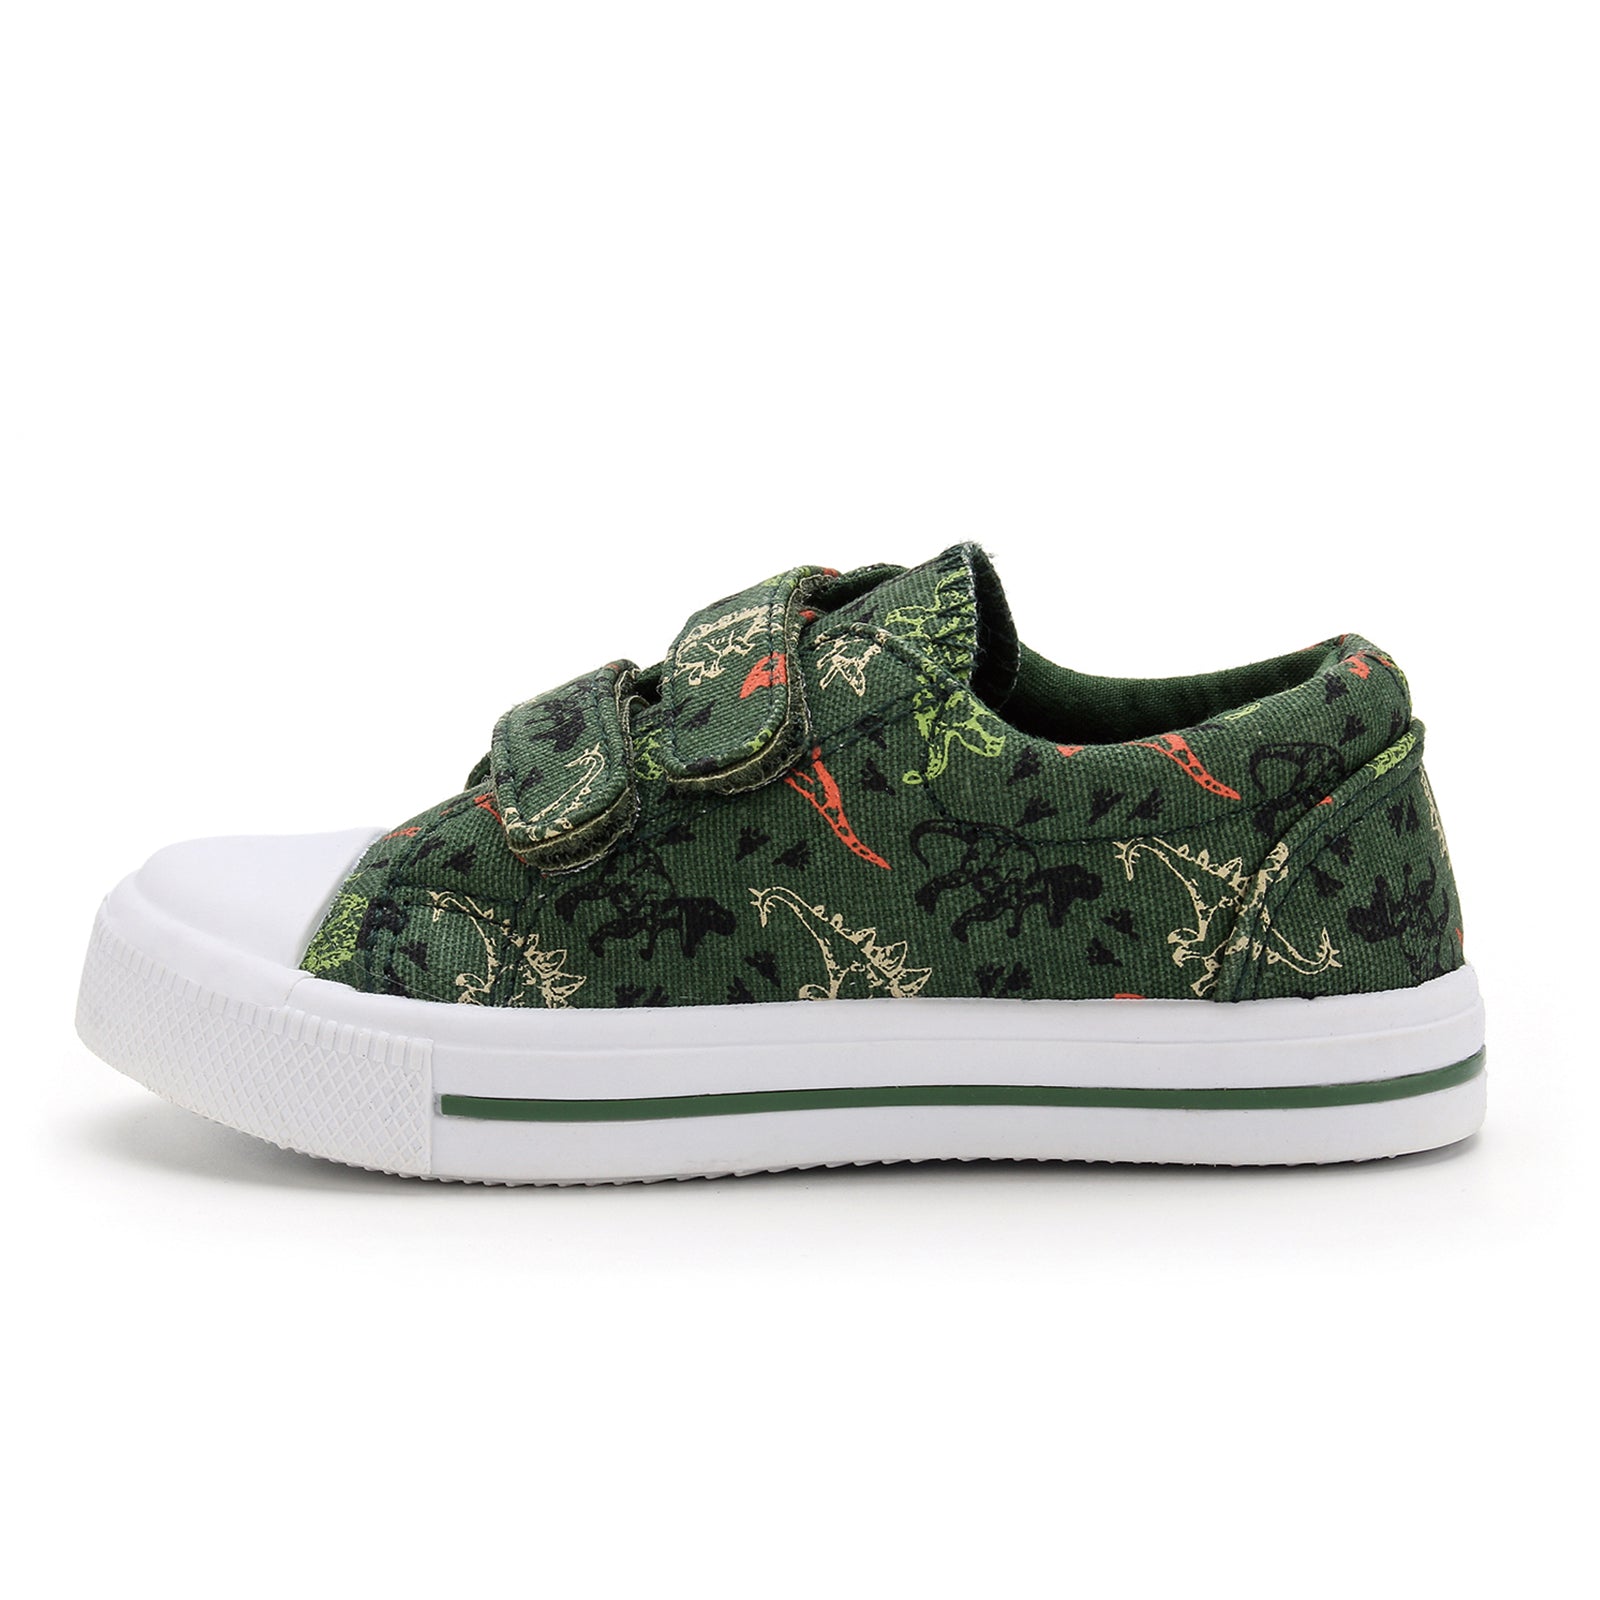 Pu Leather Green White Sneakers Lace-up Casual Flat Men's Shoes $5.91 -  Wholesale China Men's Shoes at Factory Prices from Xiamen Xuruihang Import  And Export Co.,Ltd | Globalsources.com